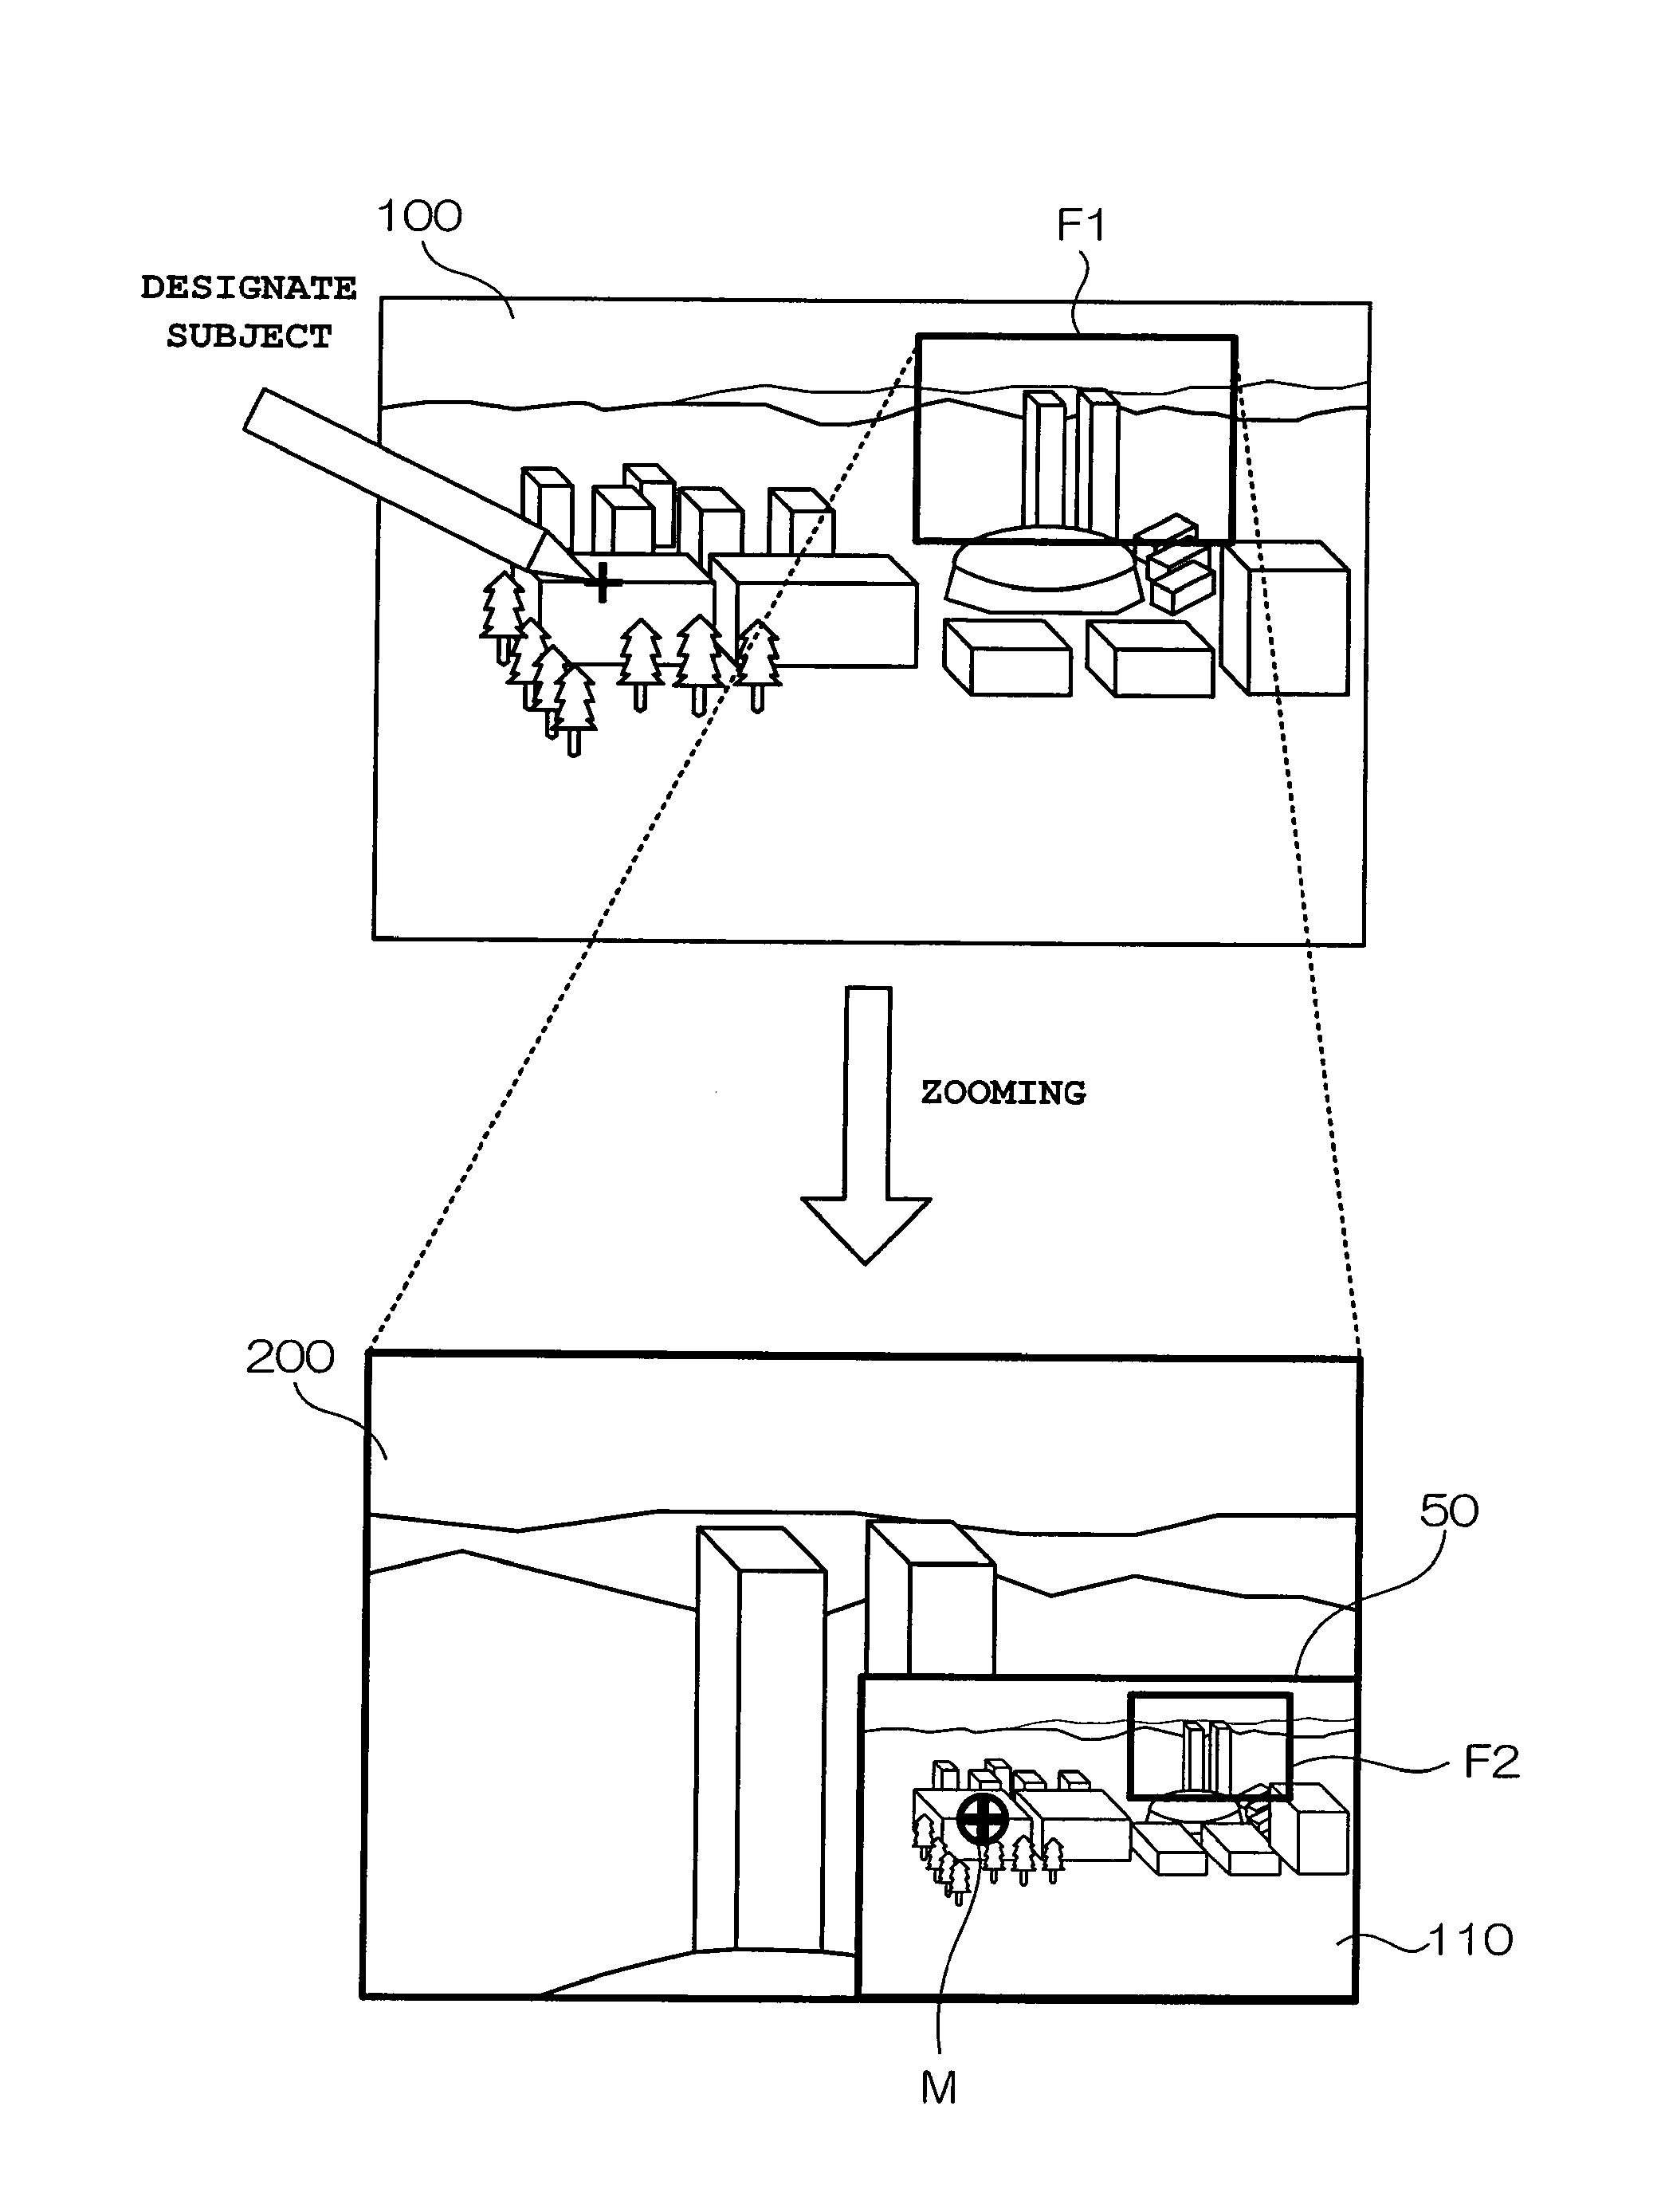 Imaging apparatus having a zoom function